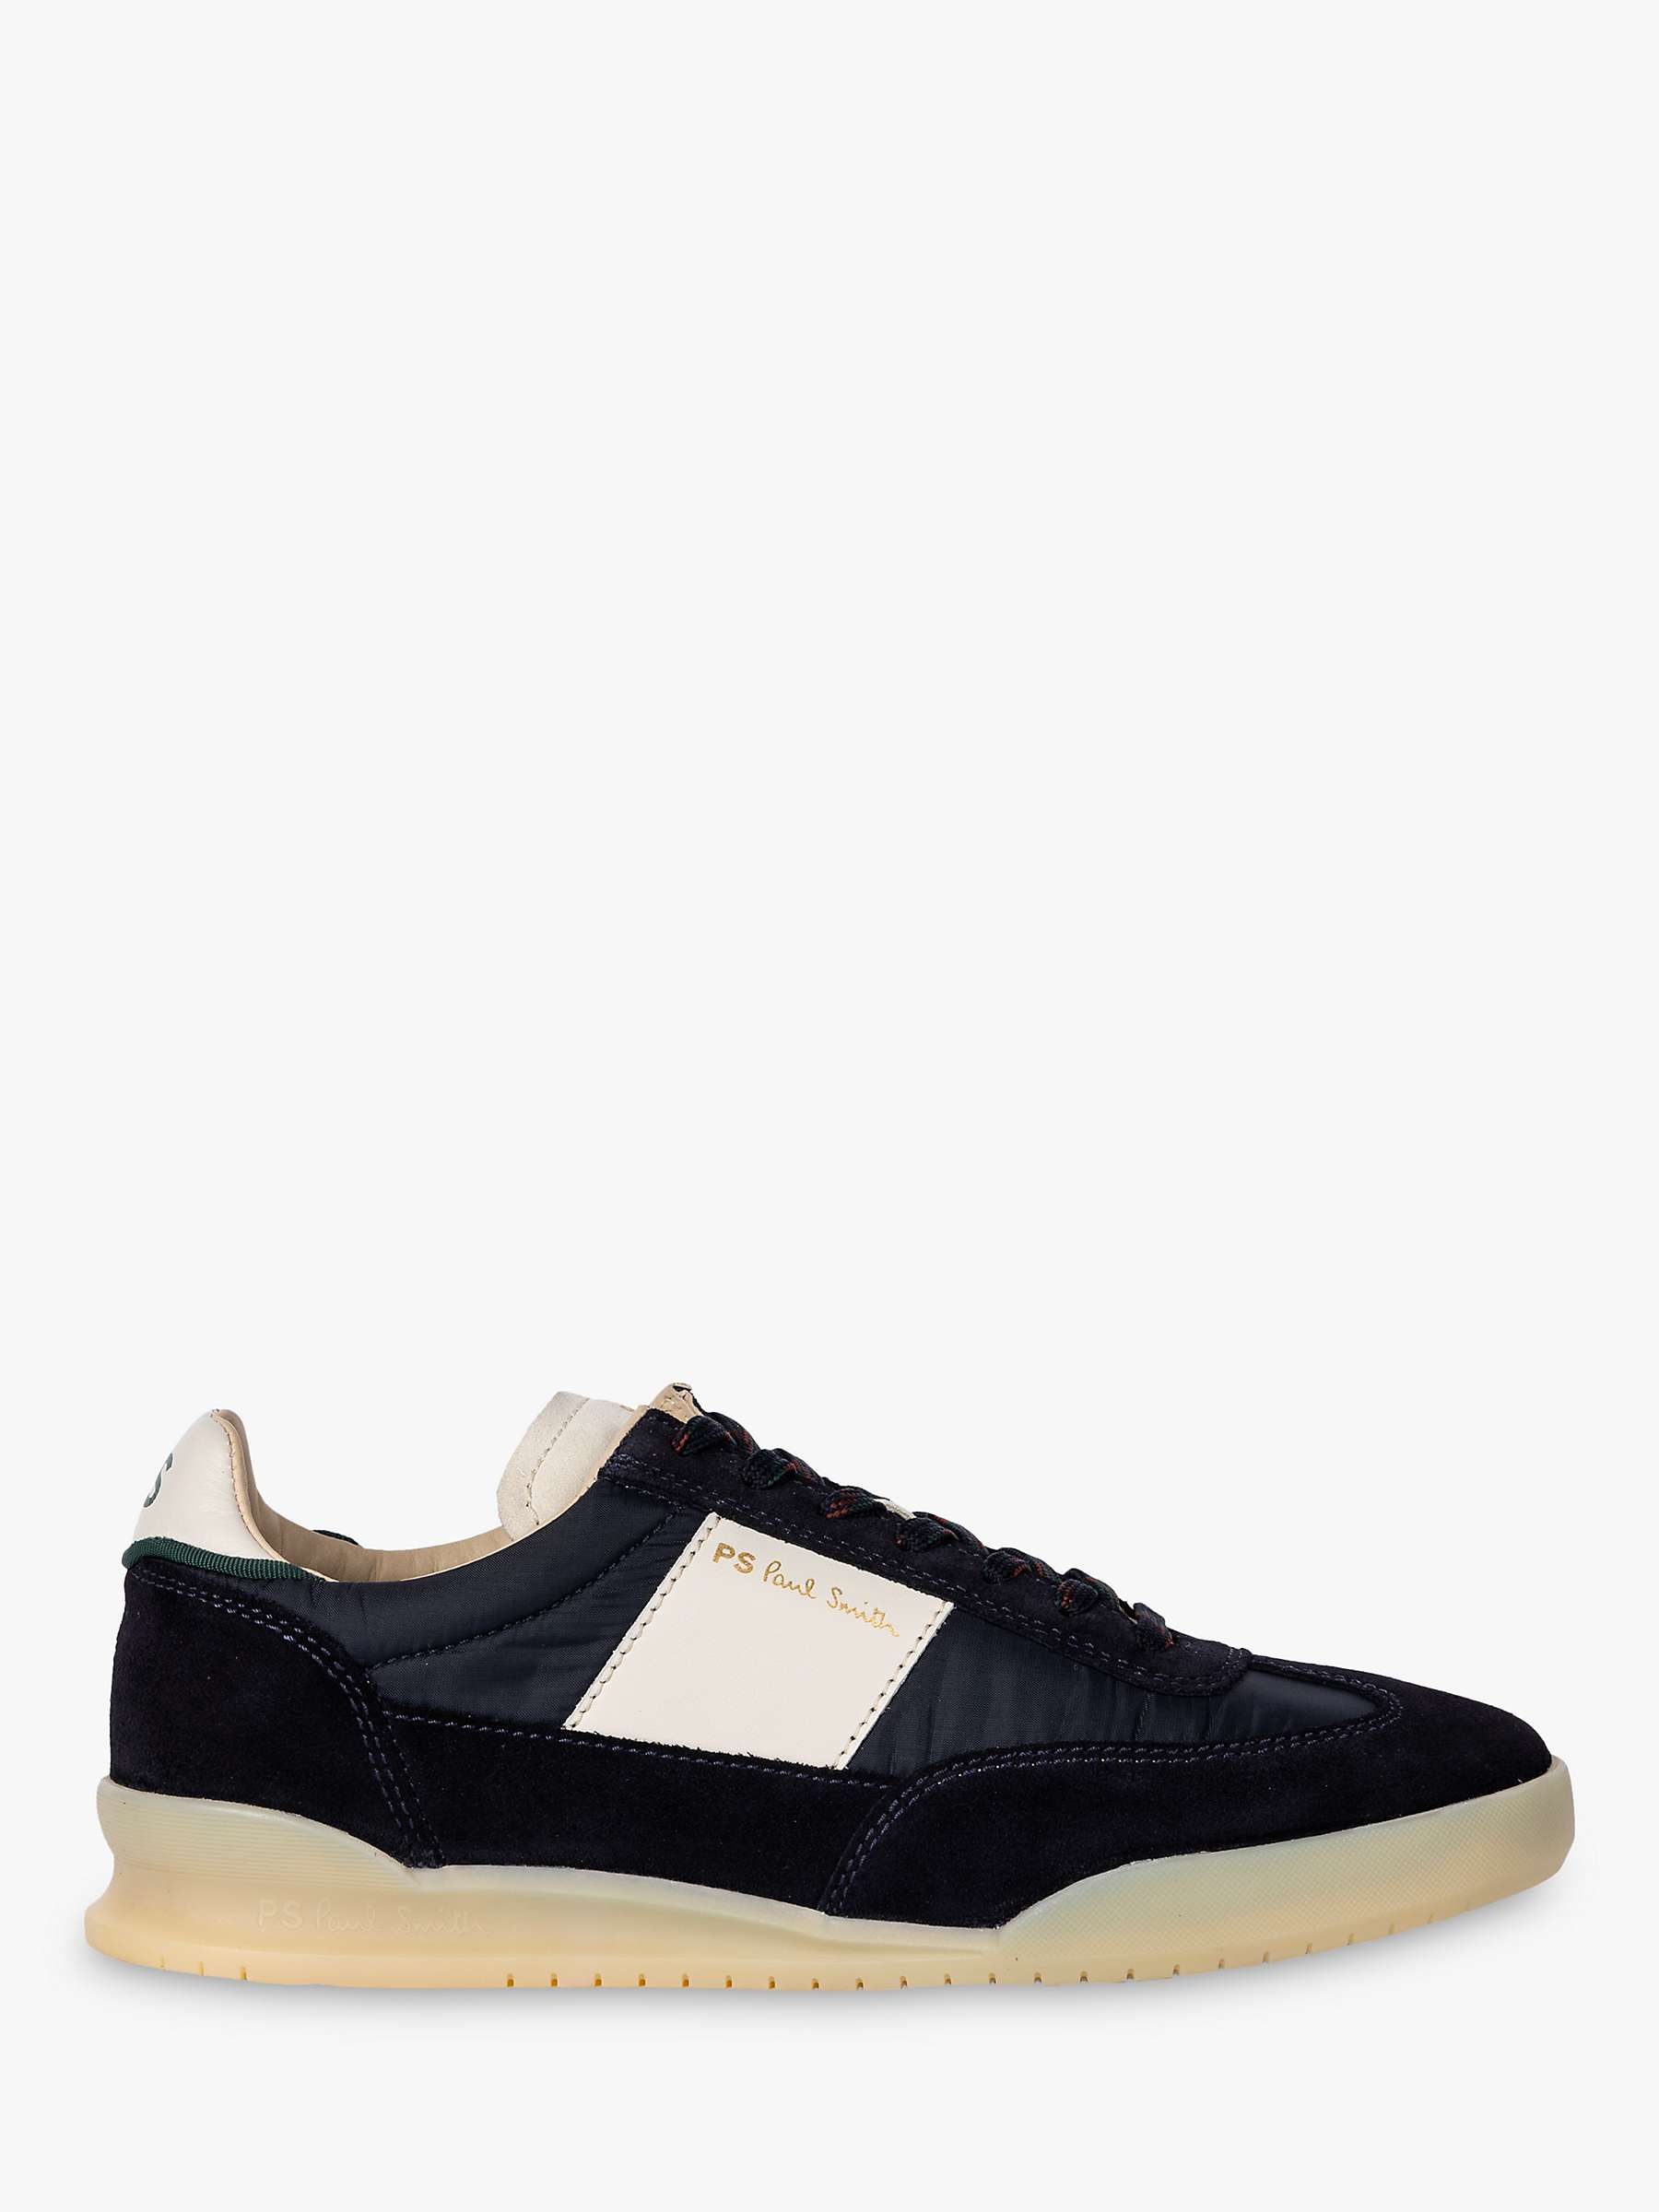 Buy Paul Smith Dover Premium Suede Leather Shoes Online at johnlewis.com